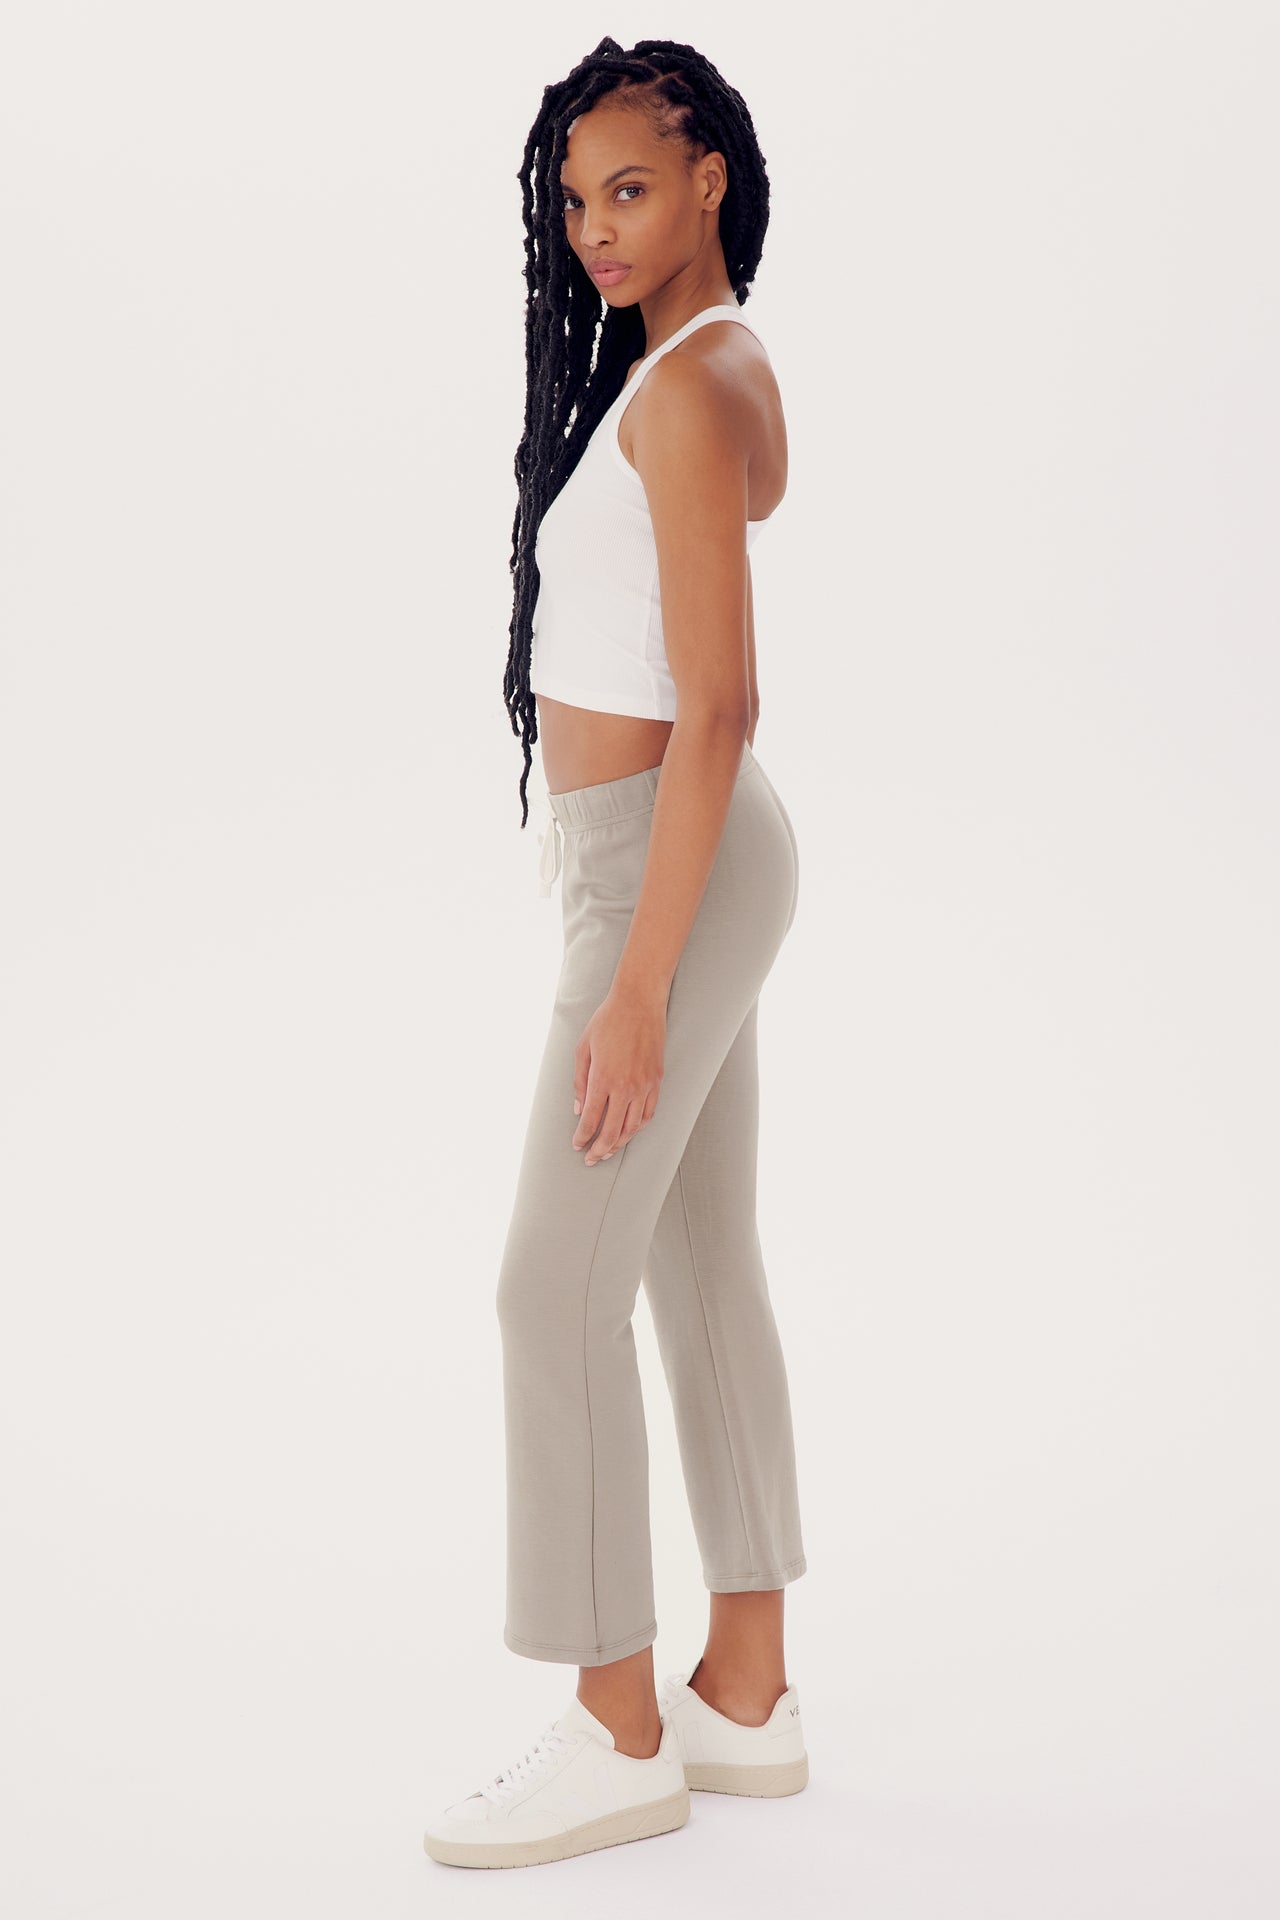 A woman in a white tank top and SPLITS59 beige flared trousers stands sideways, looking over her shoulder, with a neutral expression and long braided hair.